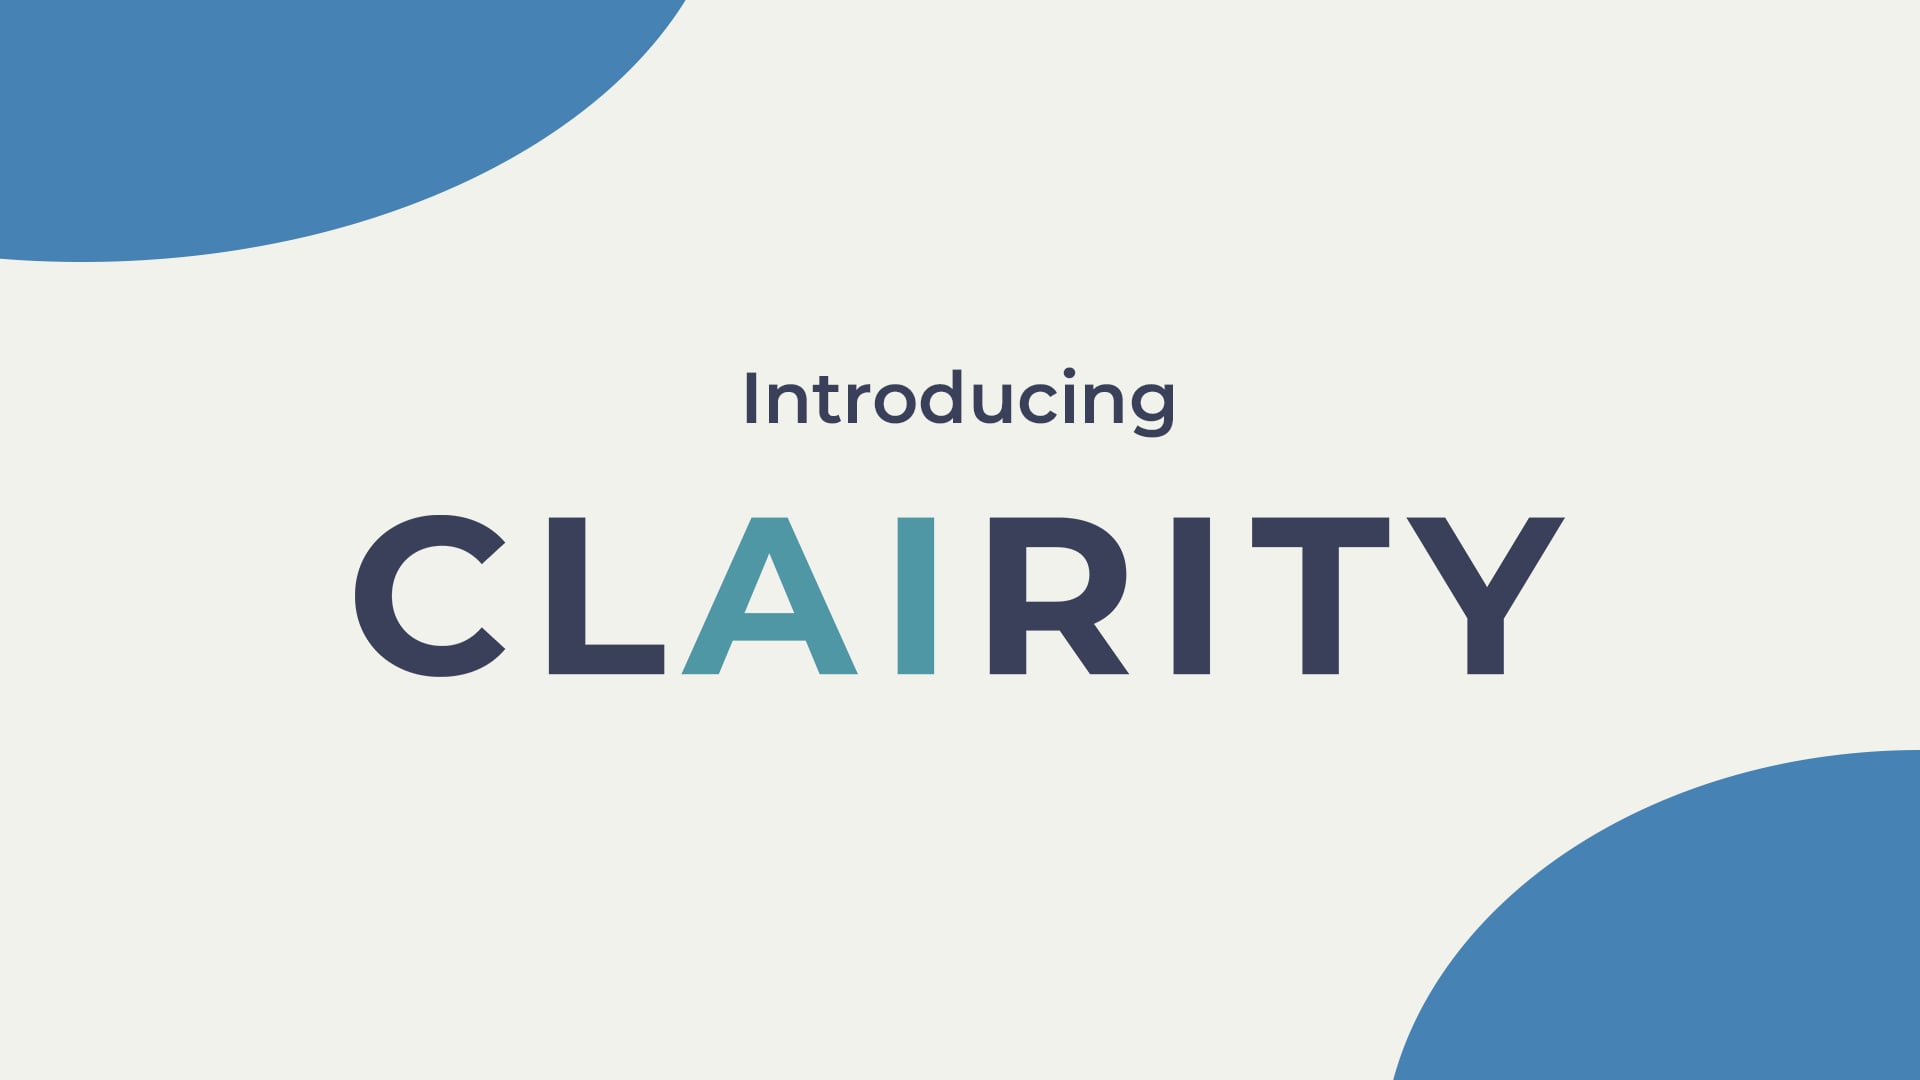 Clairity Learning Library